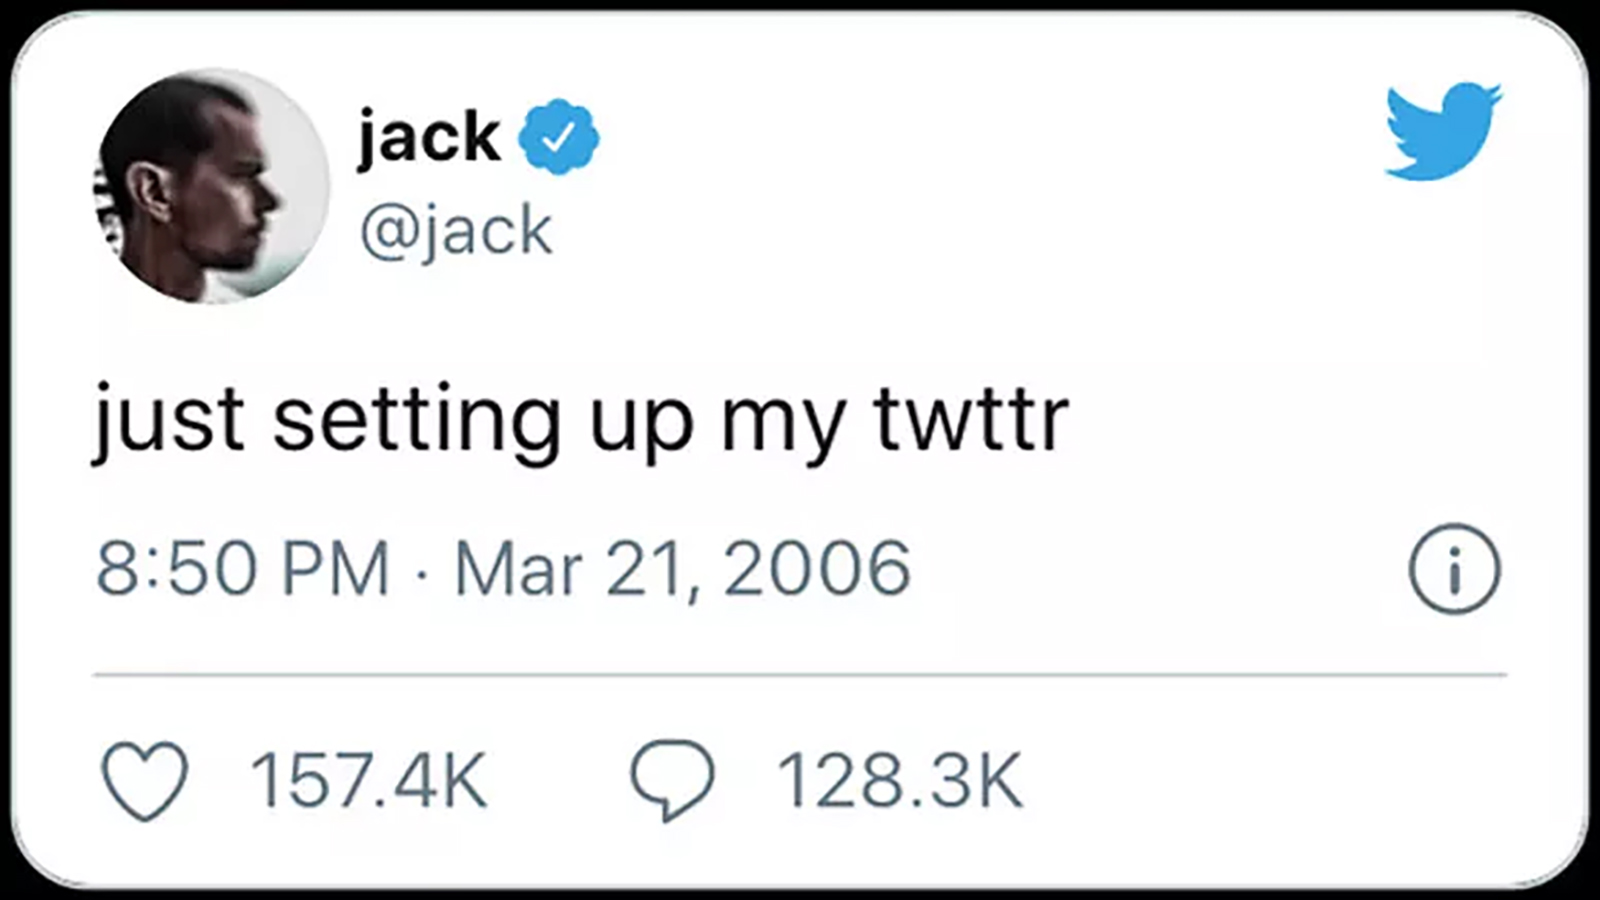 A screenshot of the first ever Tweet from Jack Dorsey which says 